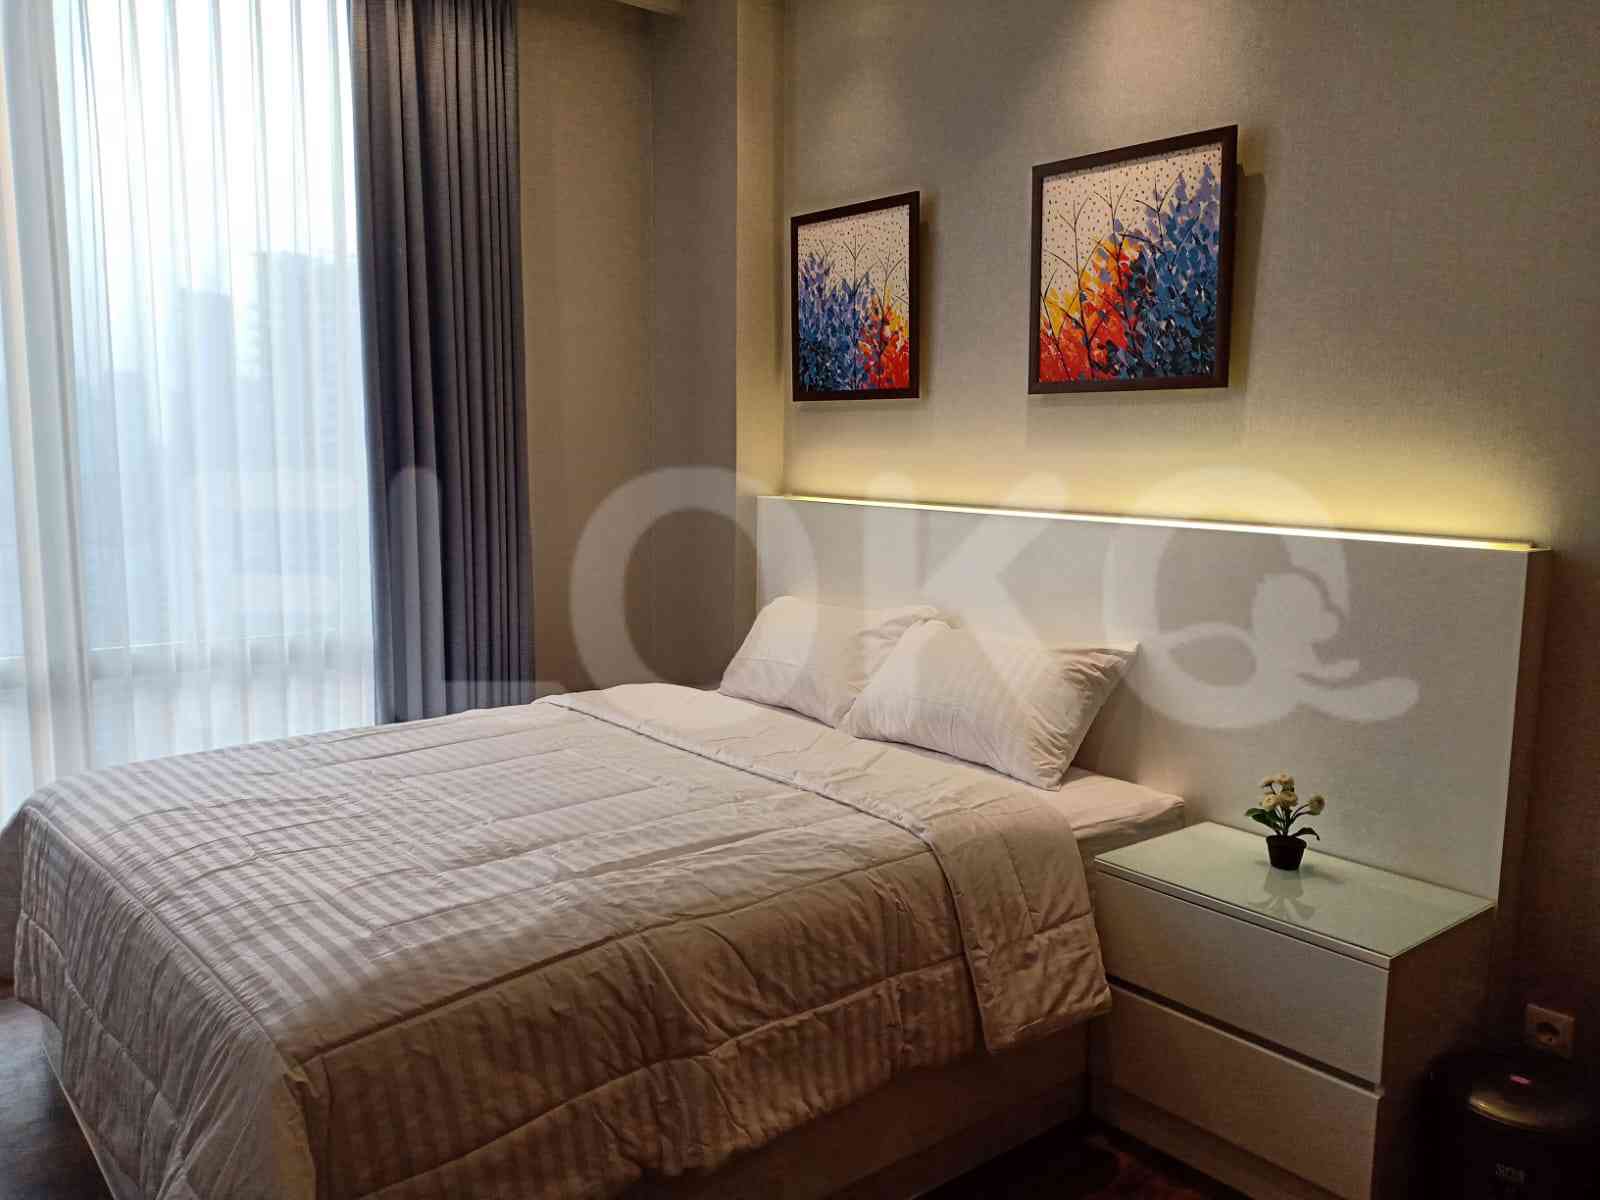 2 Bedroom on 27th Floor for Rent in The Elements Kuningan Apartment - fkua8e 4